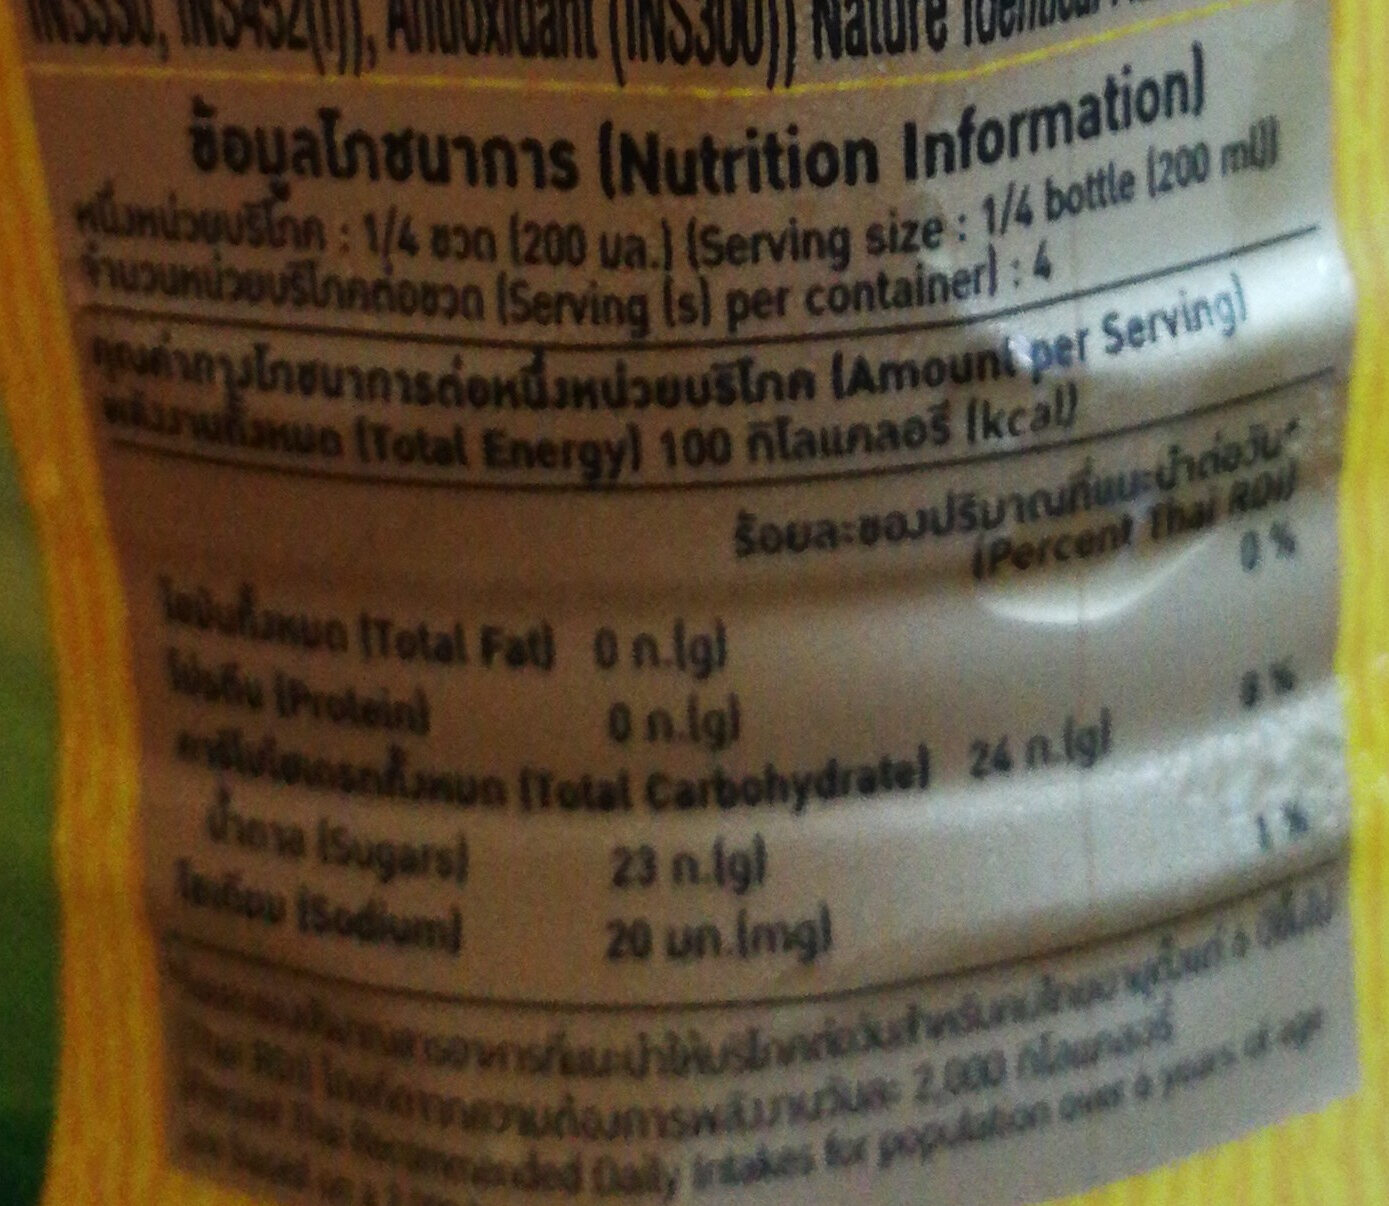 Thé froid - Nutrition facts